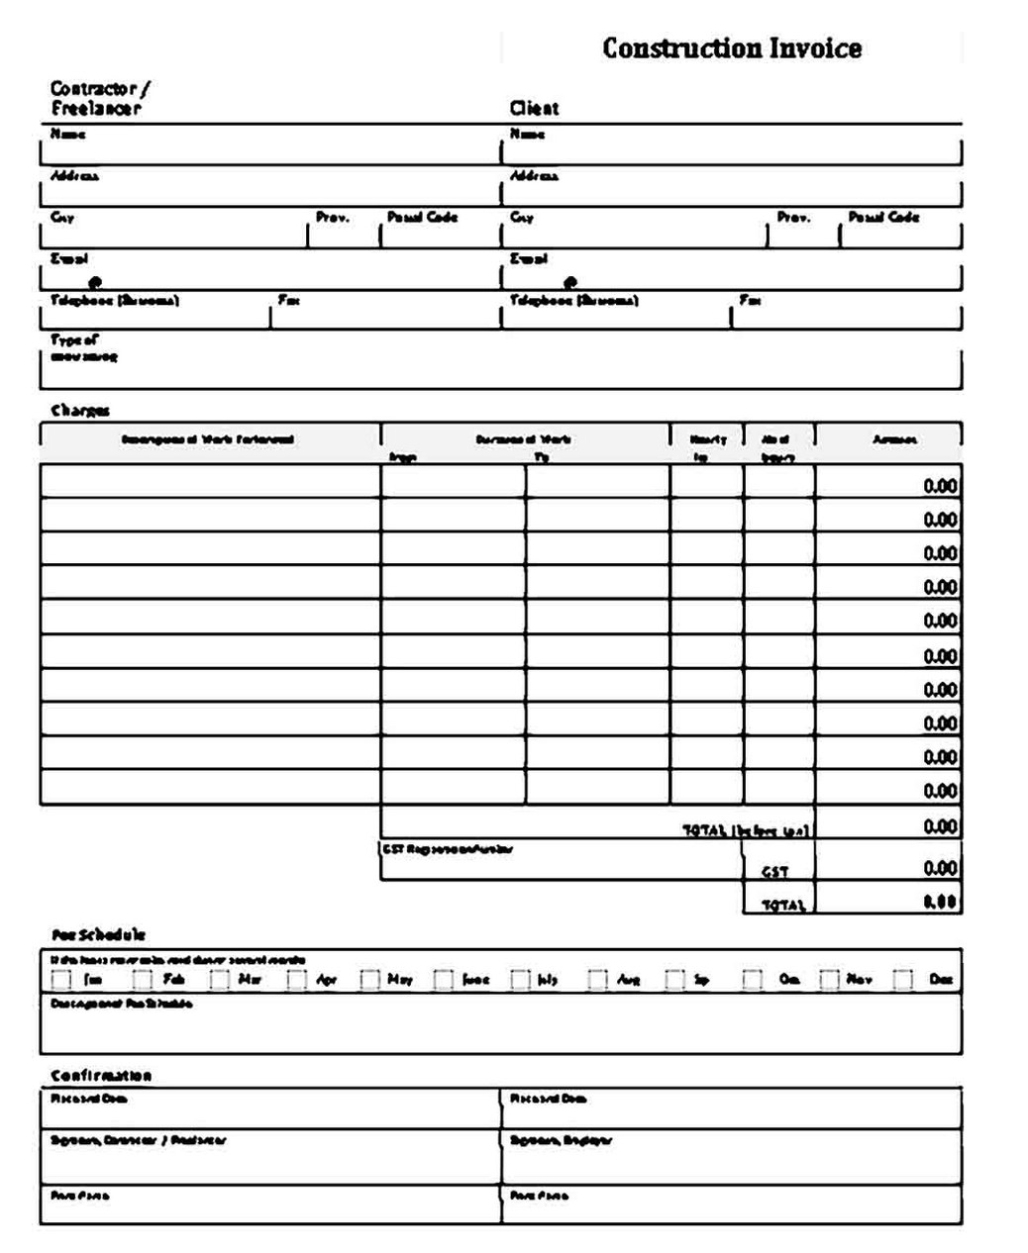 Construction Invoice Printable | Harian Nusantara Intended For Invoice Template For Builders